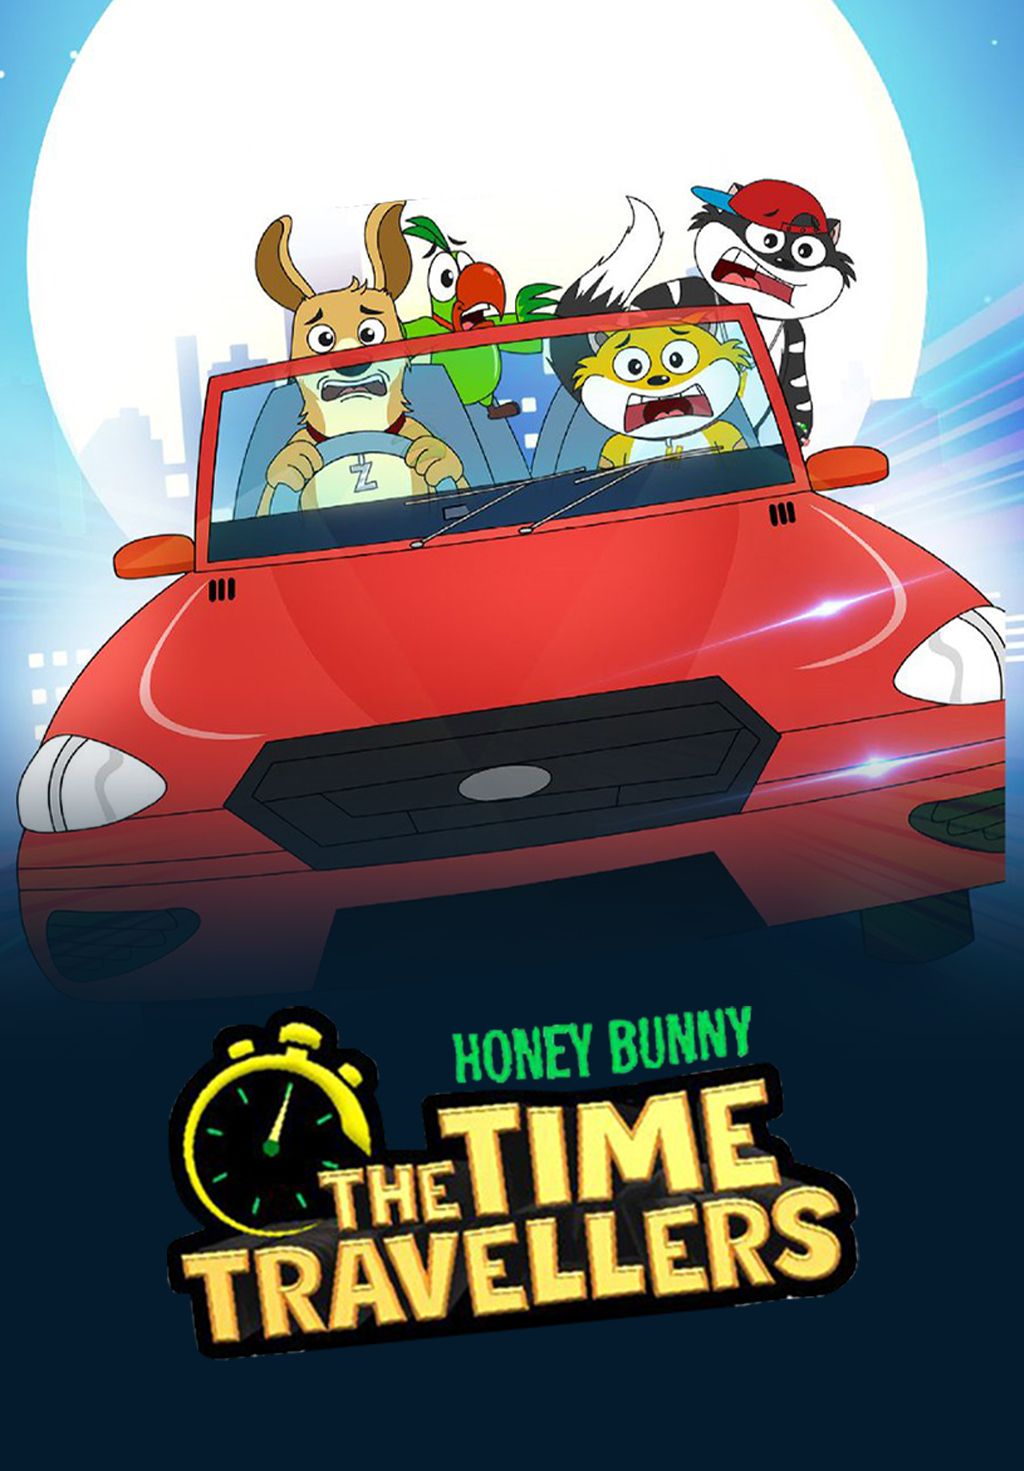 Honey Bunny The Time Travellers